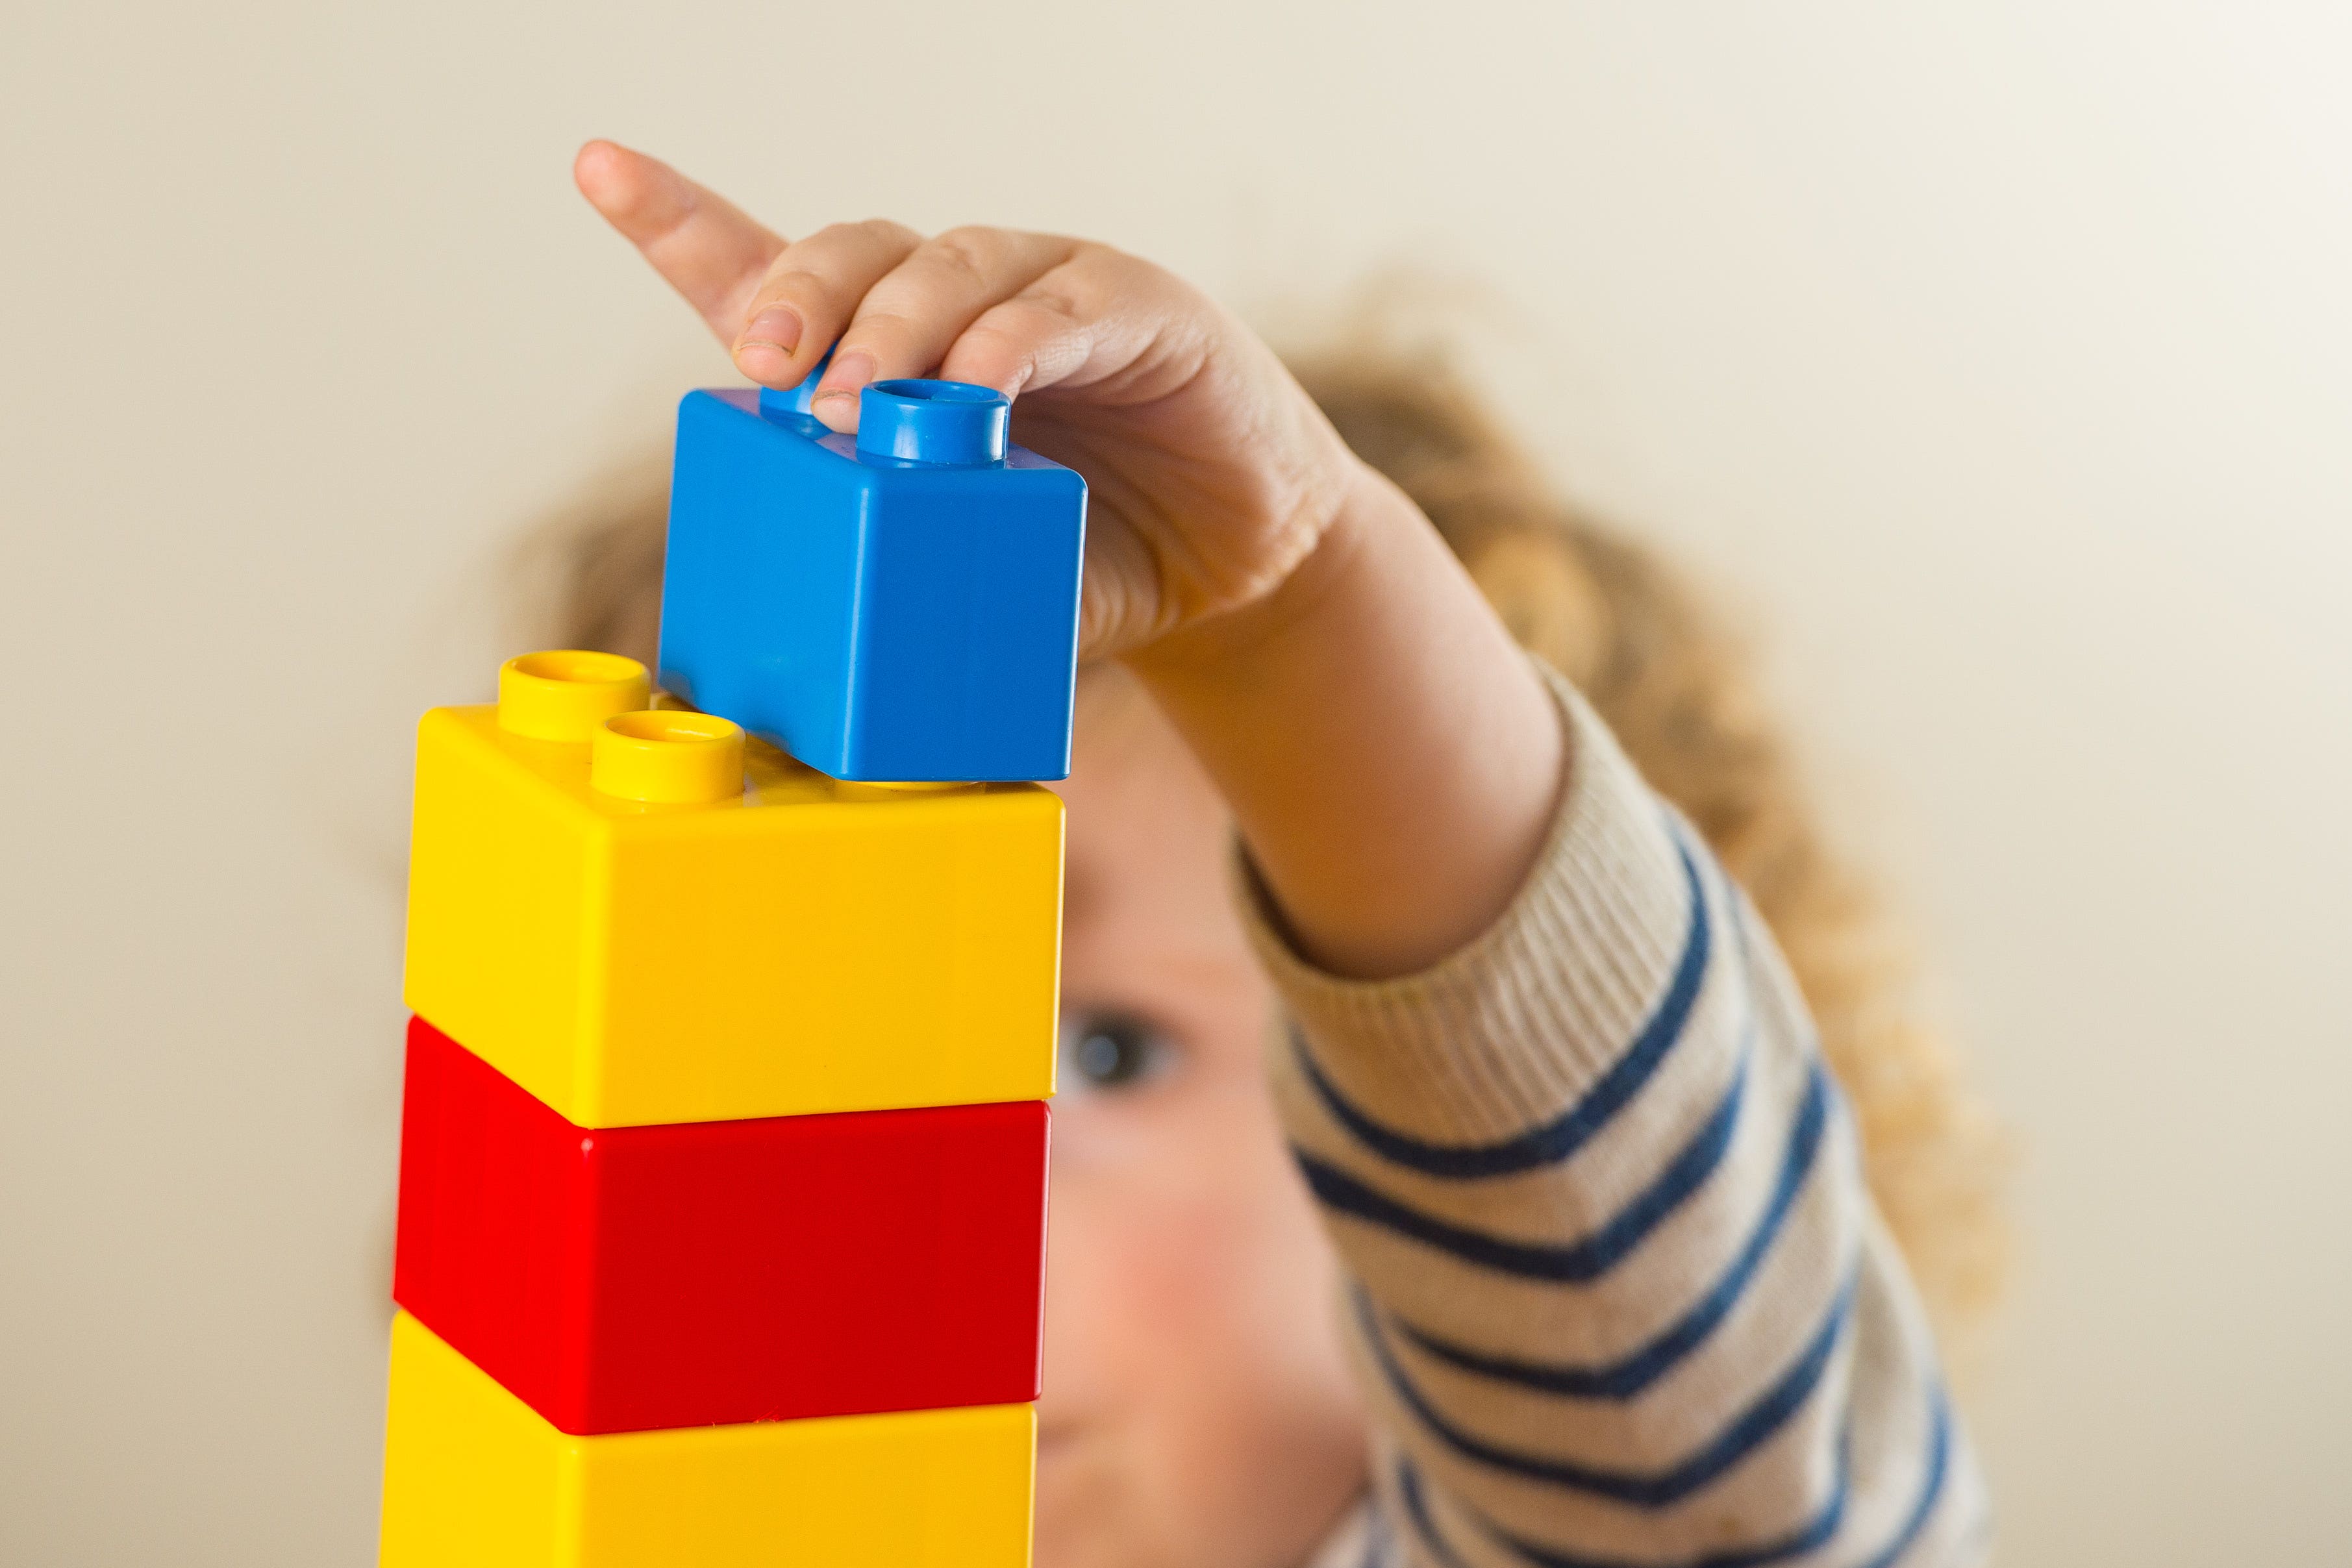 A toddler playing with plastic building blocks